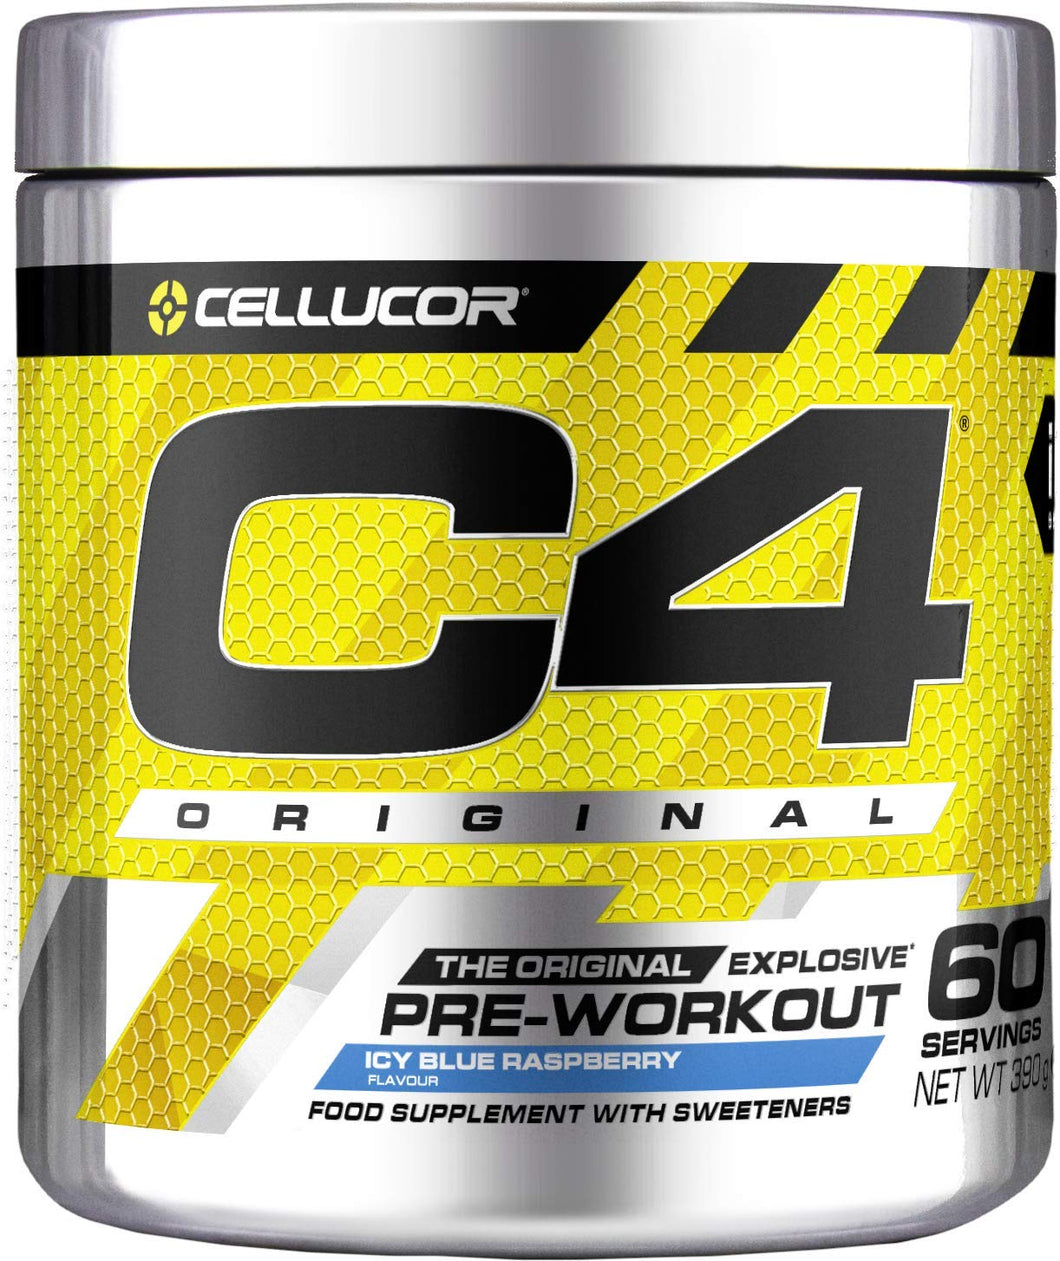 Cellucor C4 Original Pre Workout Powder Energy Drink with Creatine Monohydrate & Beta Alanine, 60 Servings